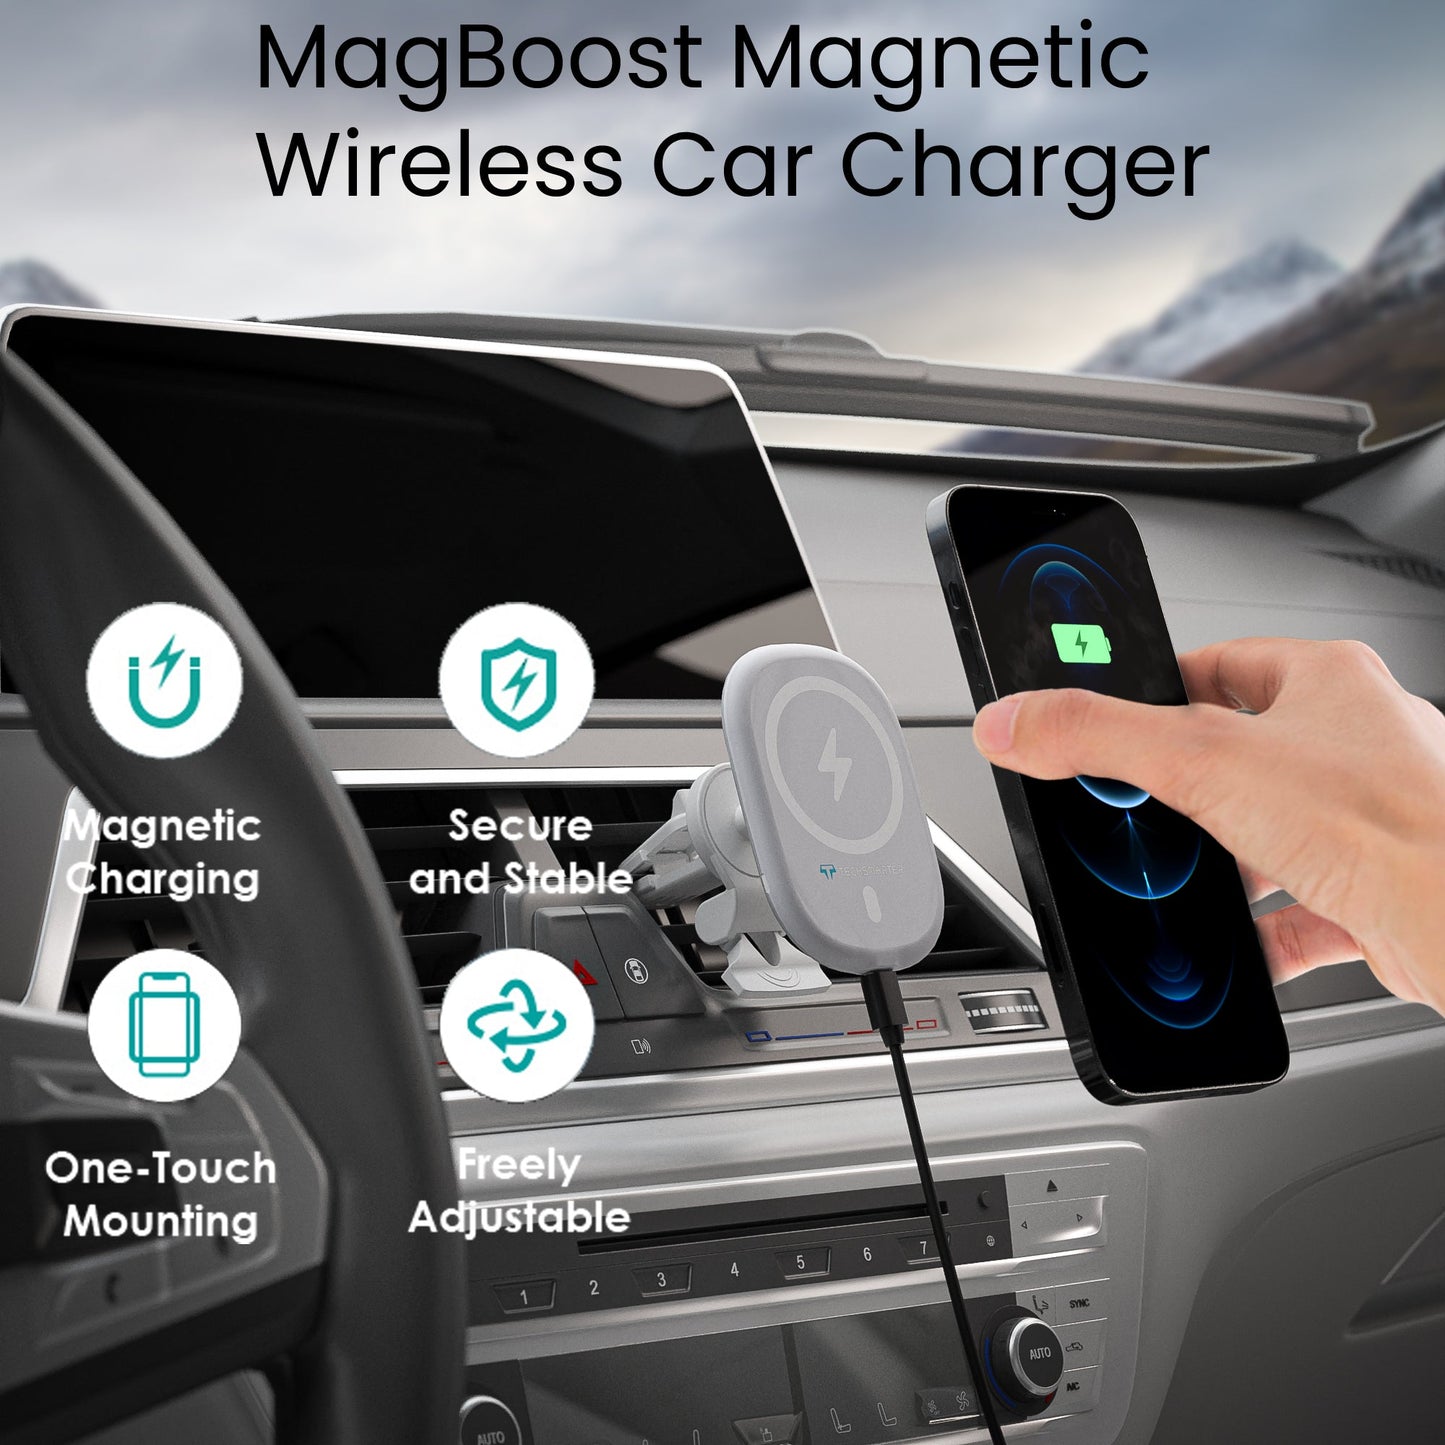 MagBoost Magnetic Wireless Car Charger - TechsmarterTechsmarterCar Mount Charger